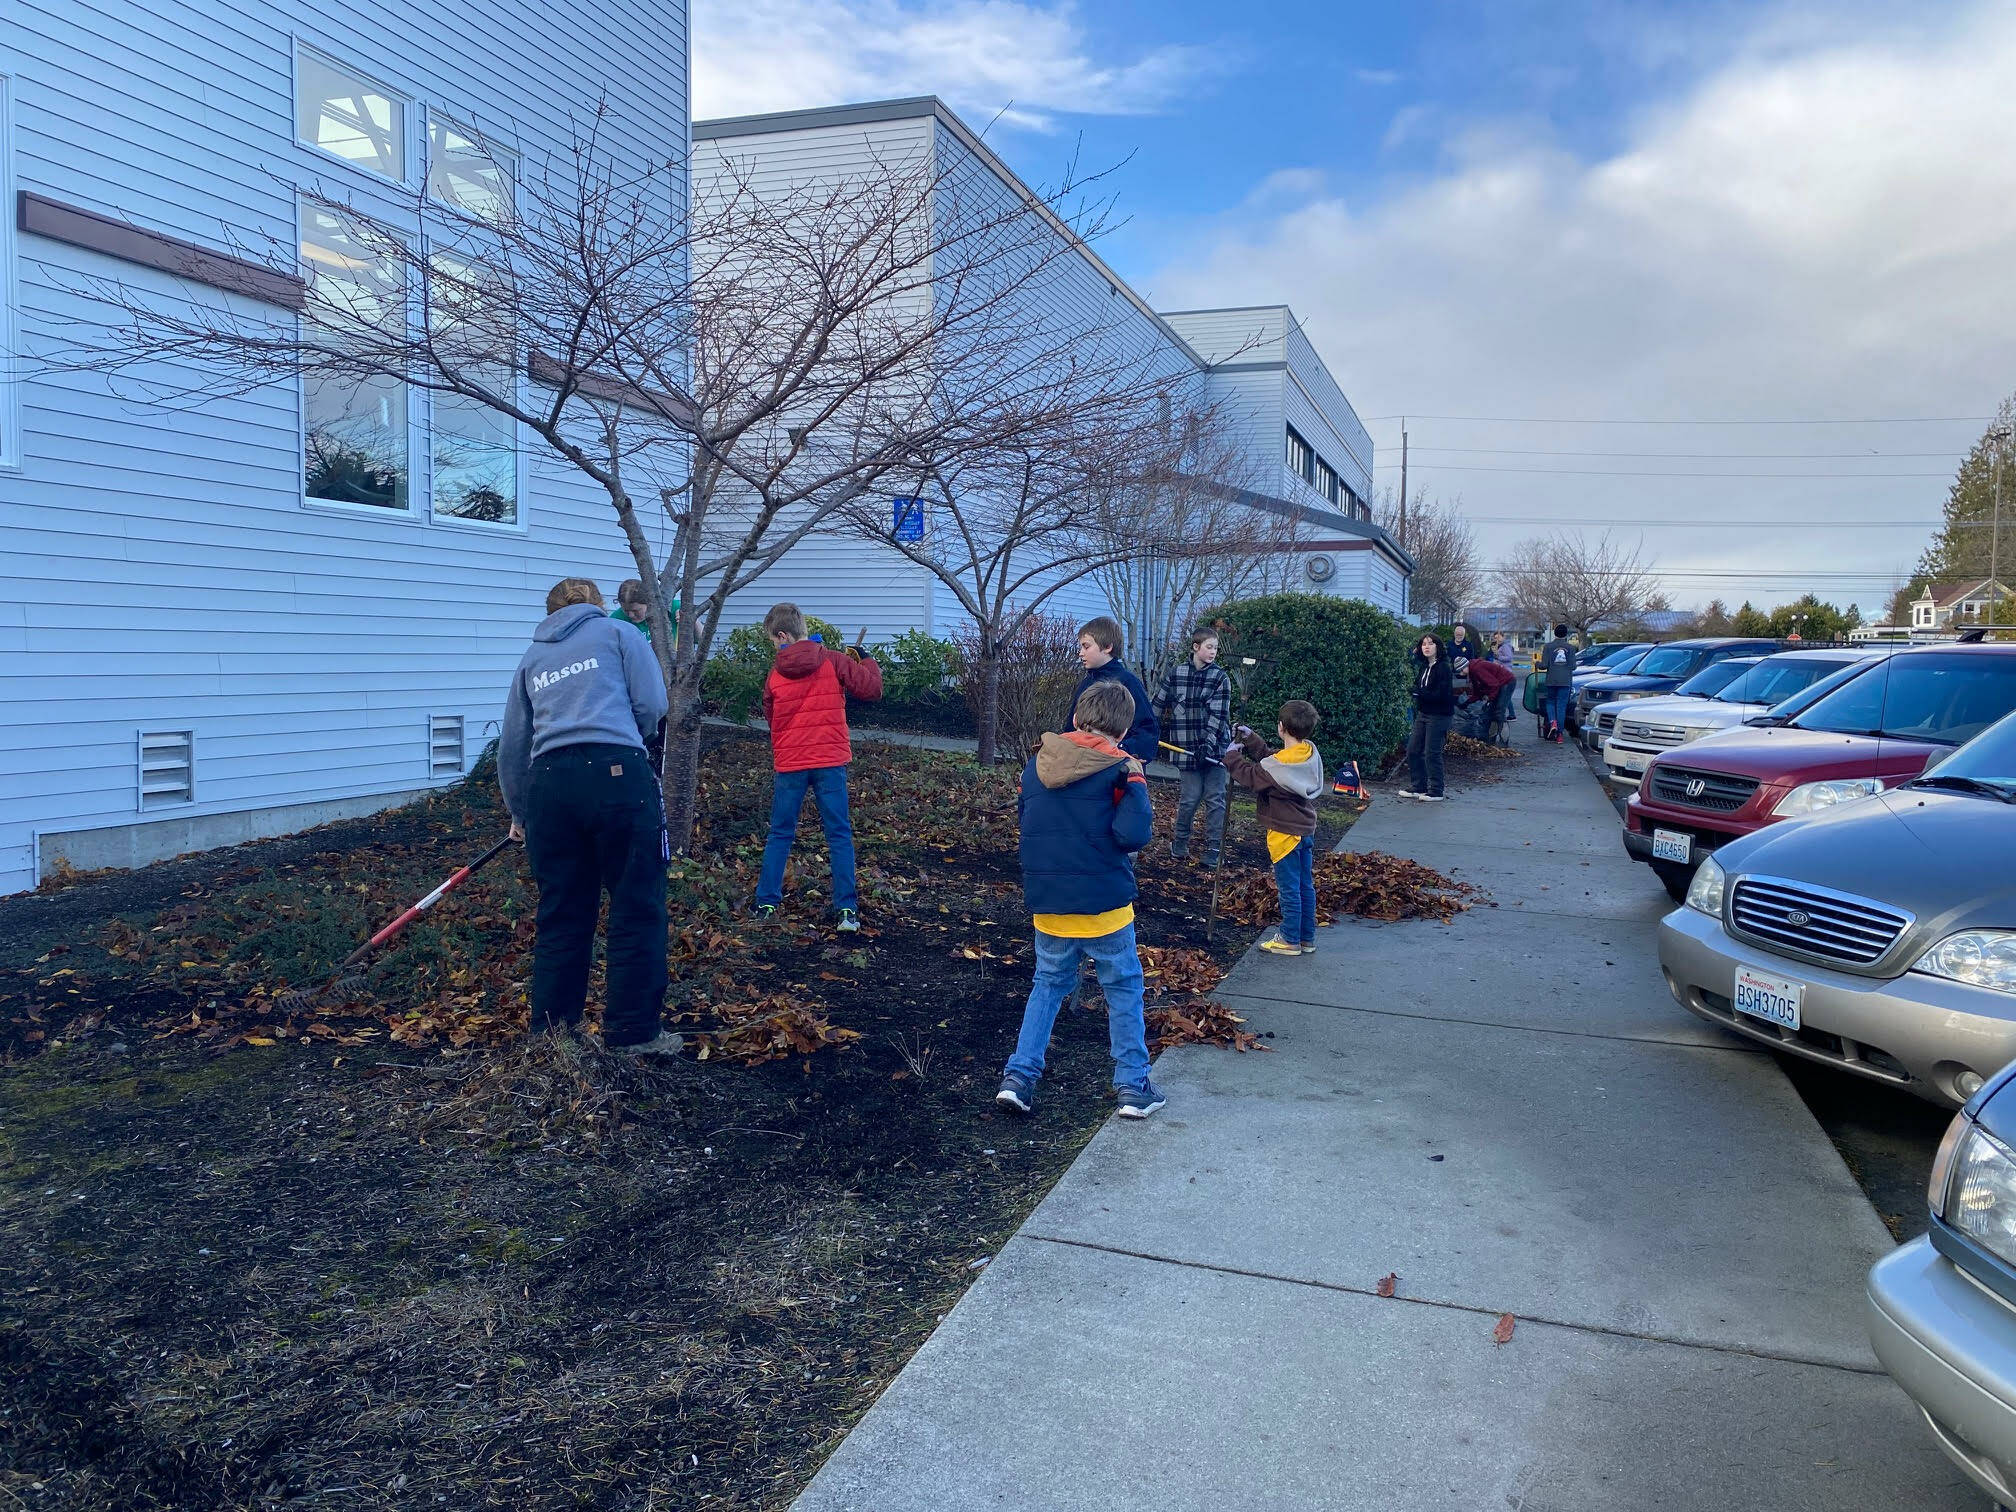 Submitted photo / Members of Sequim’s BSA Troop 1498 and Troop 7498 gather for a community service project at the Sequim YMCA earlier this month.